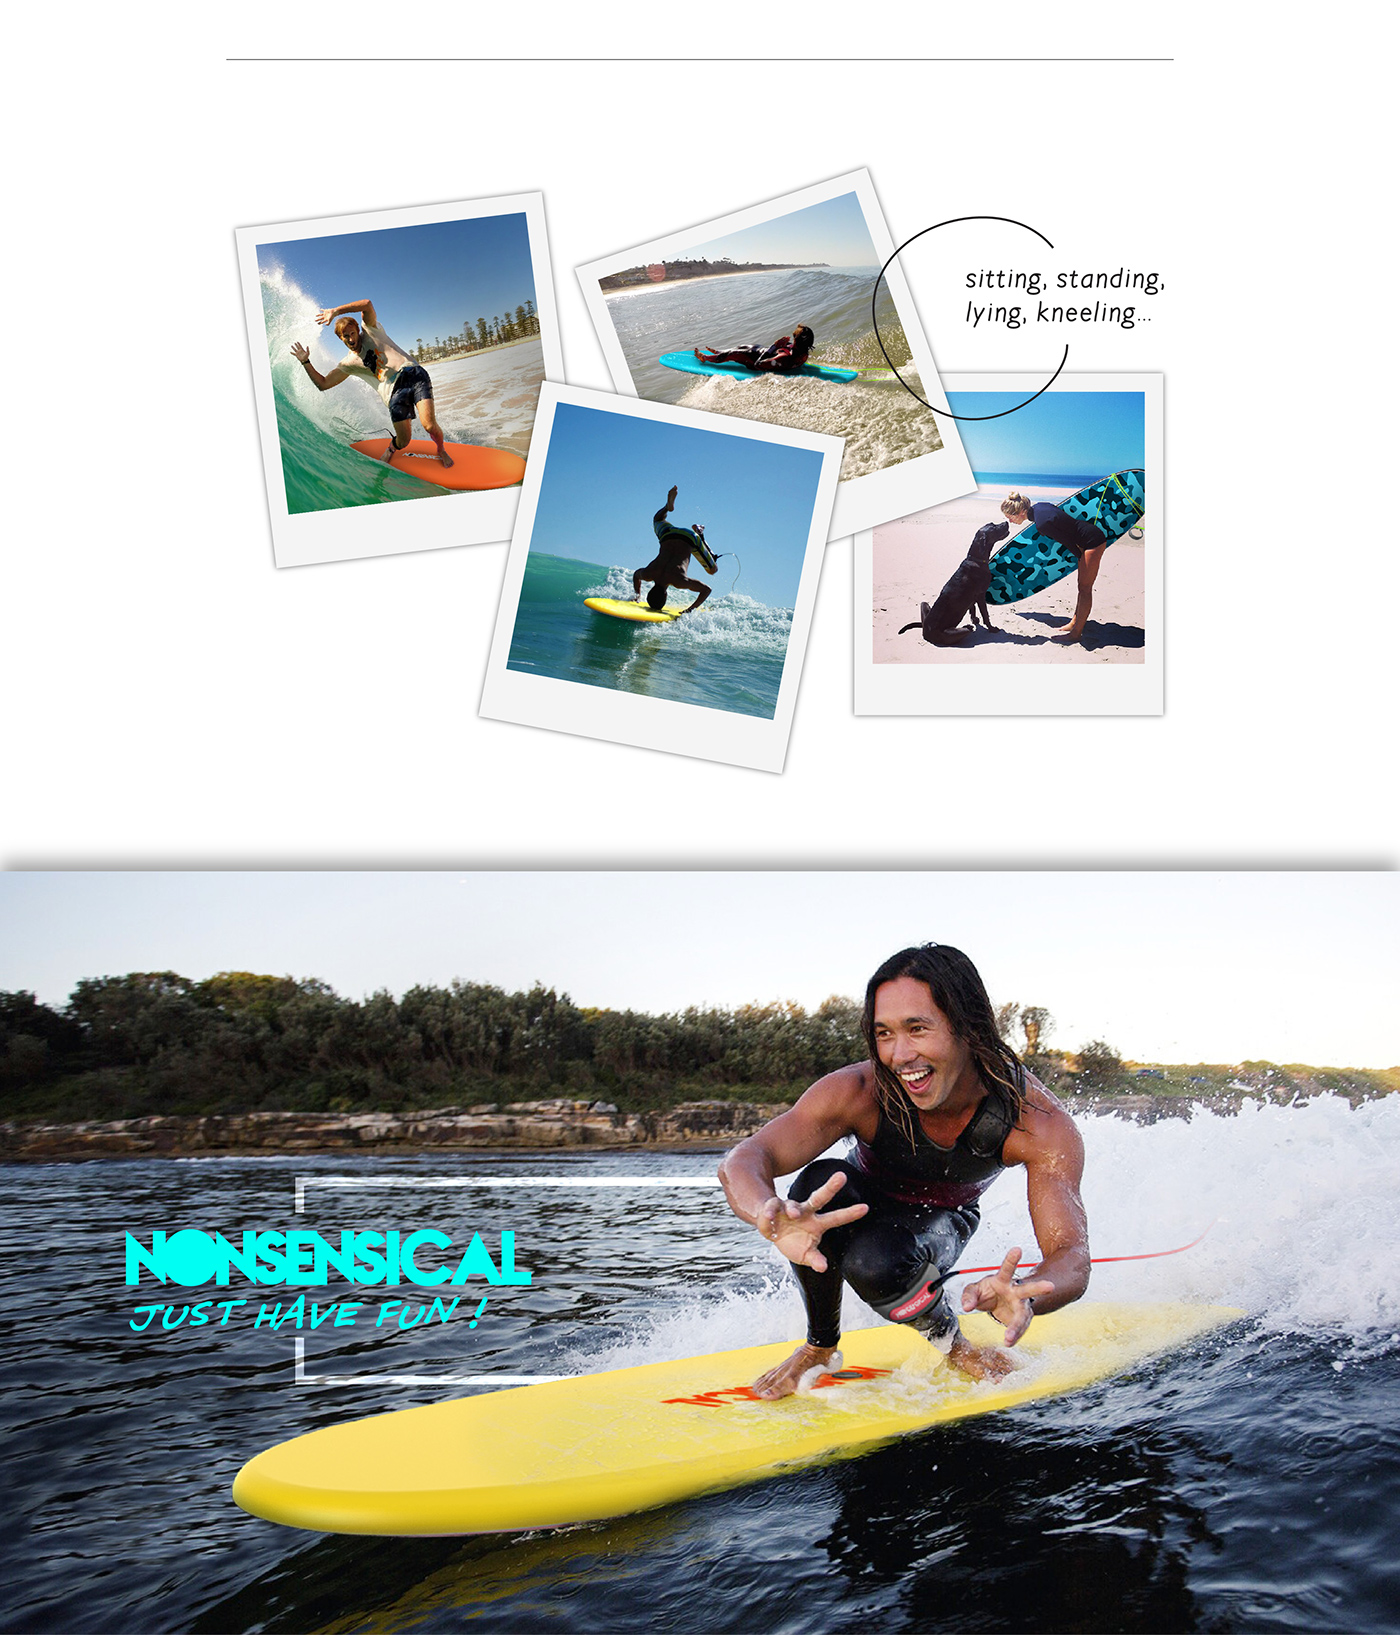 Surf surfing design product water surfboard Foam innovation concept sea